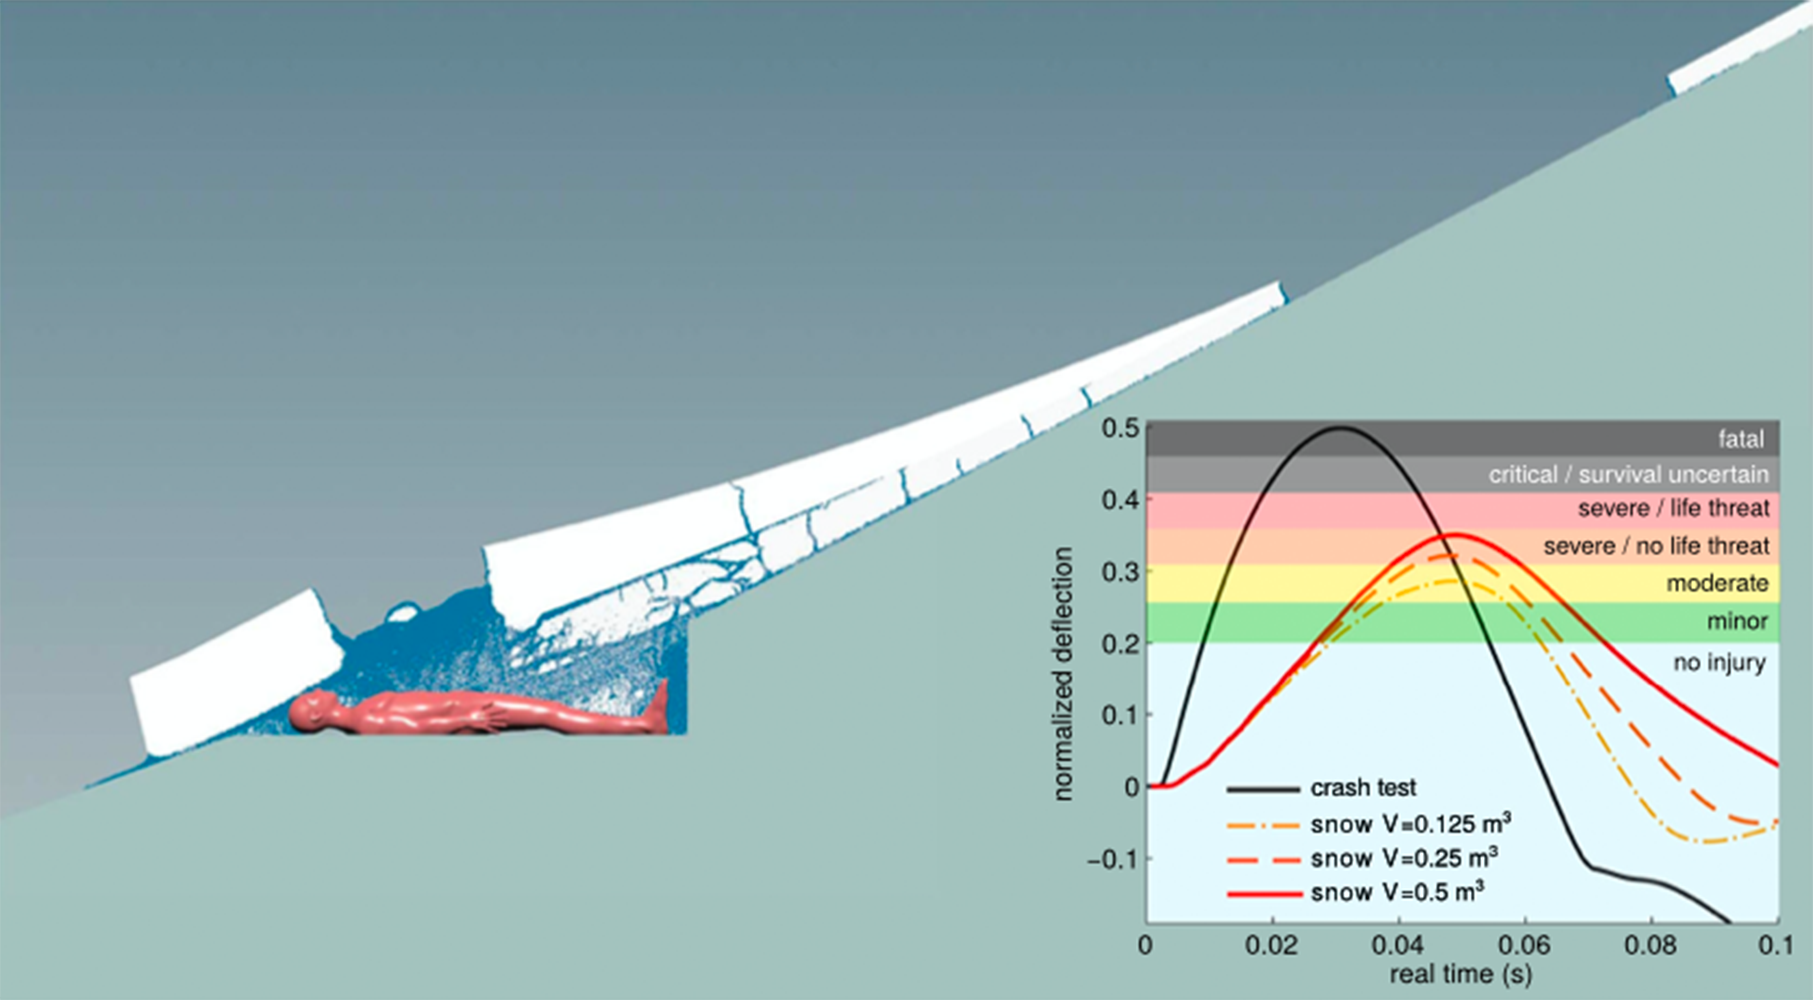 Simulation of the dynamics of a snow-slab avalanche and its impact on a human body